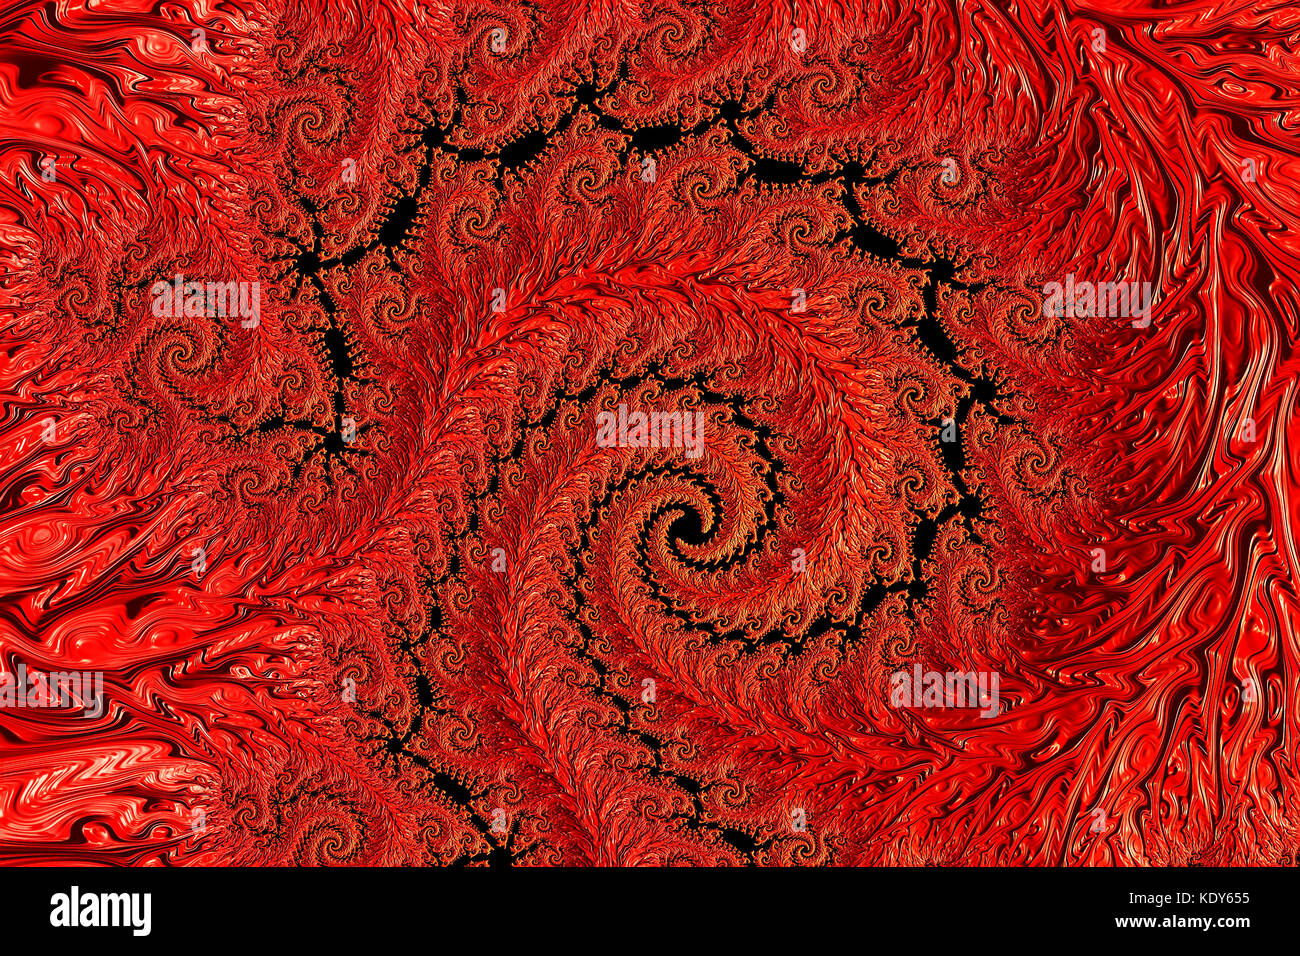 Spiral pattern - abstract digitally generated image Stock Photo